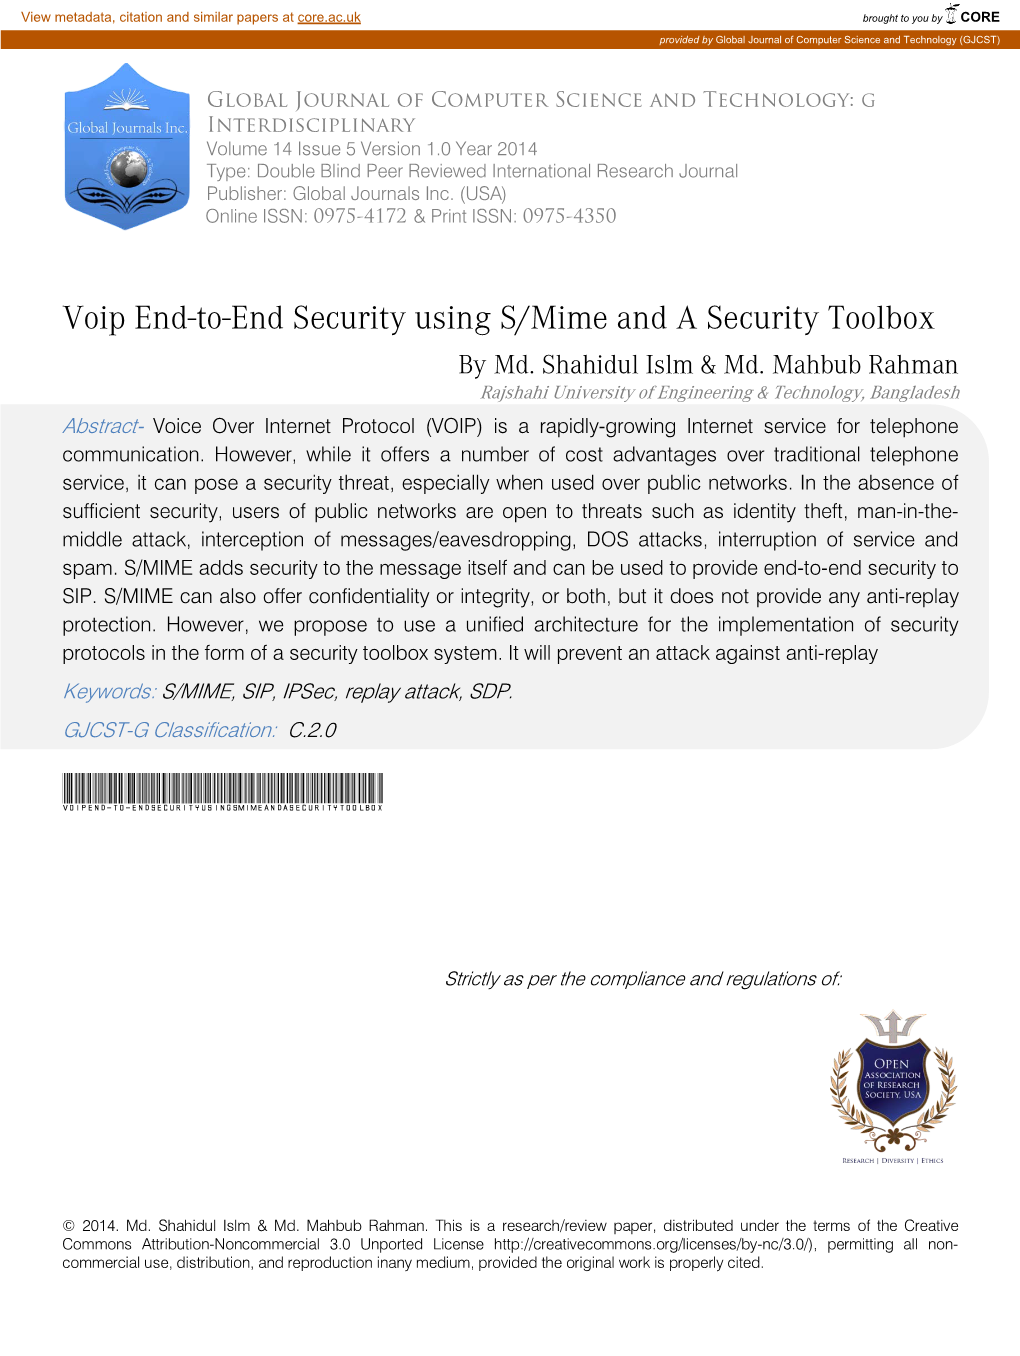 Voip End-To-End Security Using S/Mime and a Security Toolbox by Md